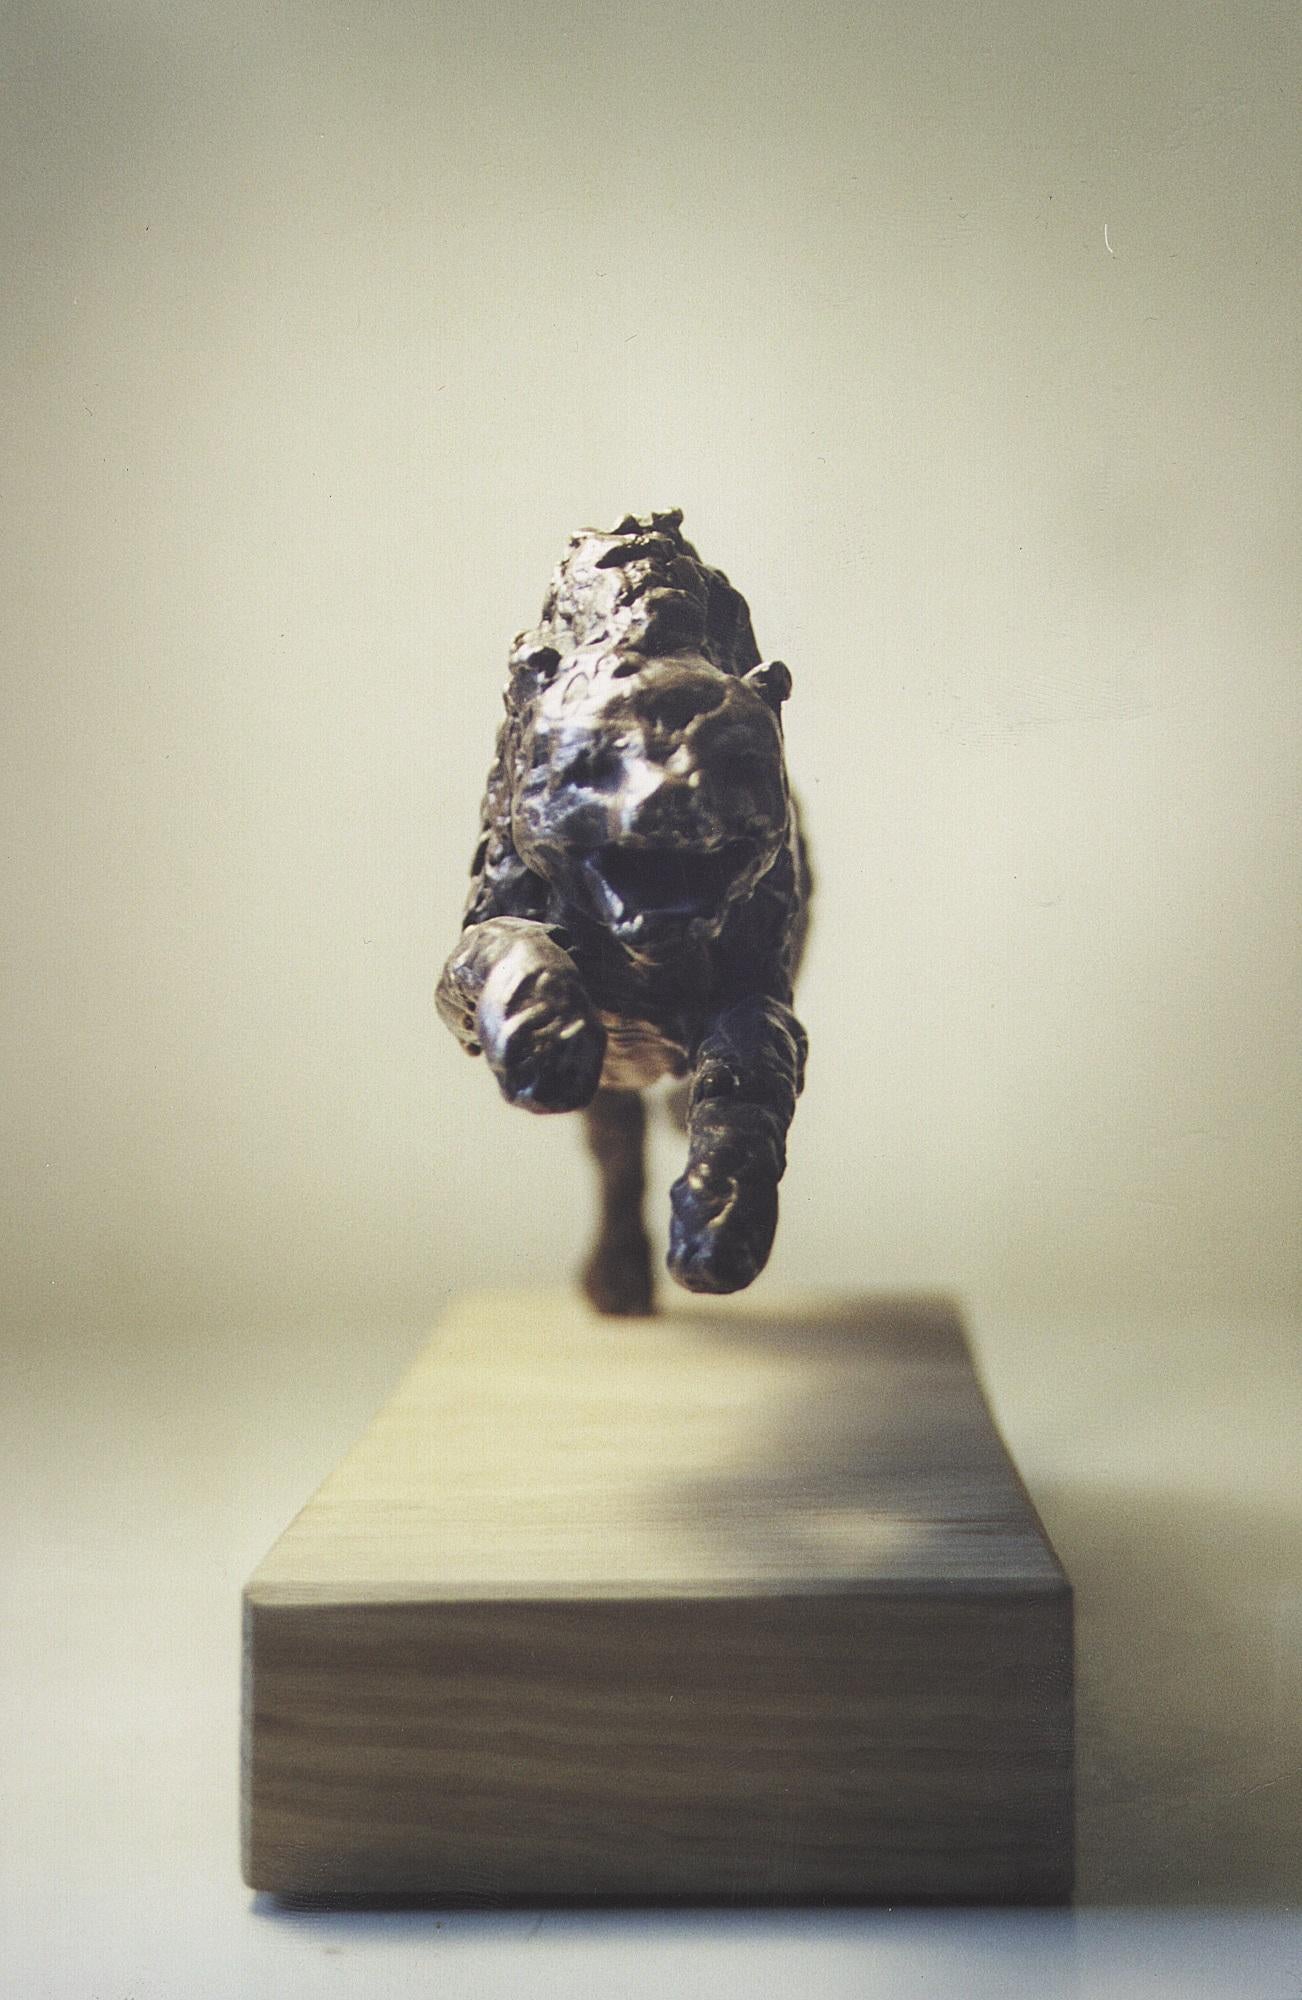 Signed bronze from small edition of 8. plus 4 artists proofs

Dominic Albinski, was born in South Africa, in 1975. He started sculpting, at
a young age, at the Art Classes of Mercia Desmond, in Johannesburg. From the
start, his talent for capturing